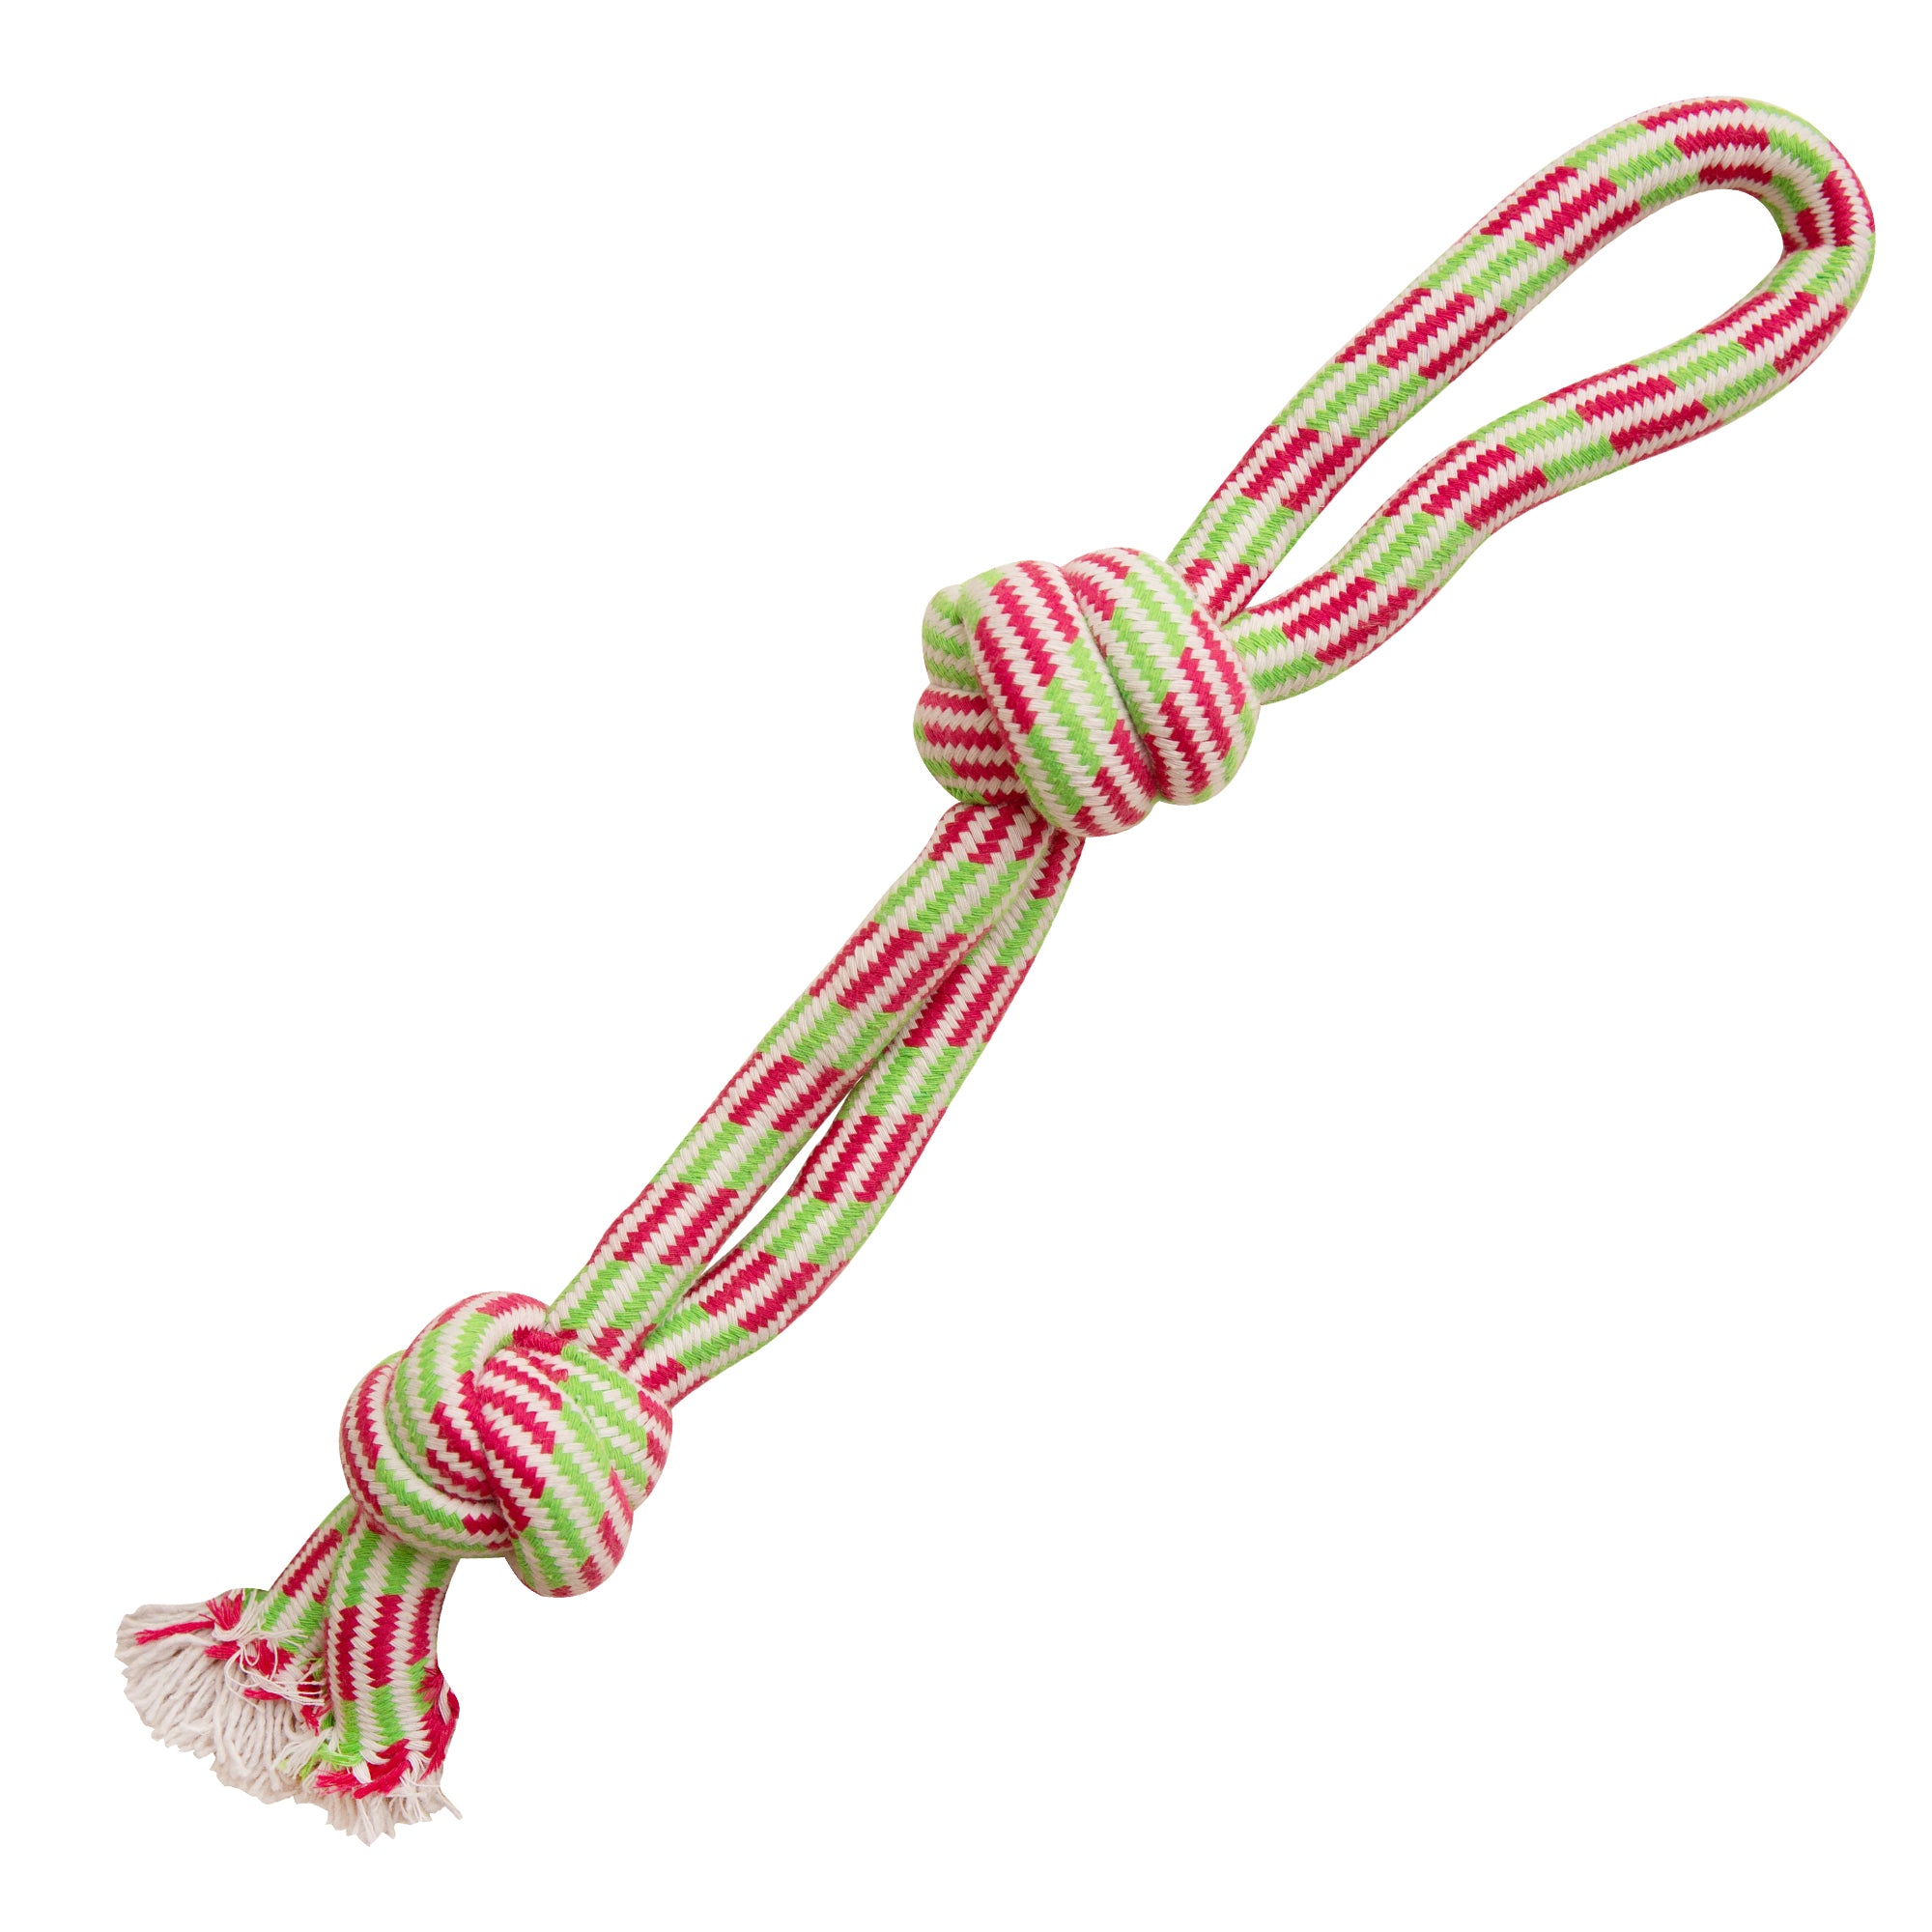 SnugArooz Fling 'N Floss dog toy; a green and red rope with a knot